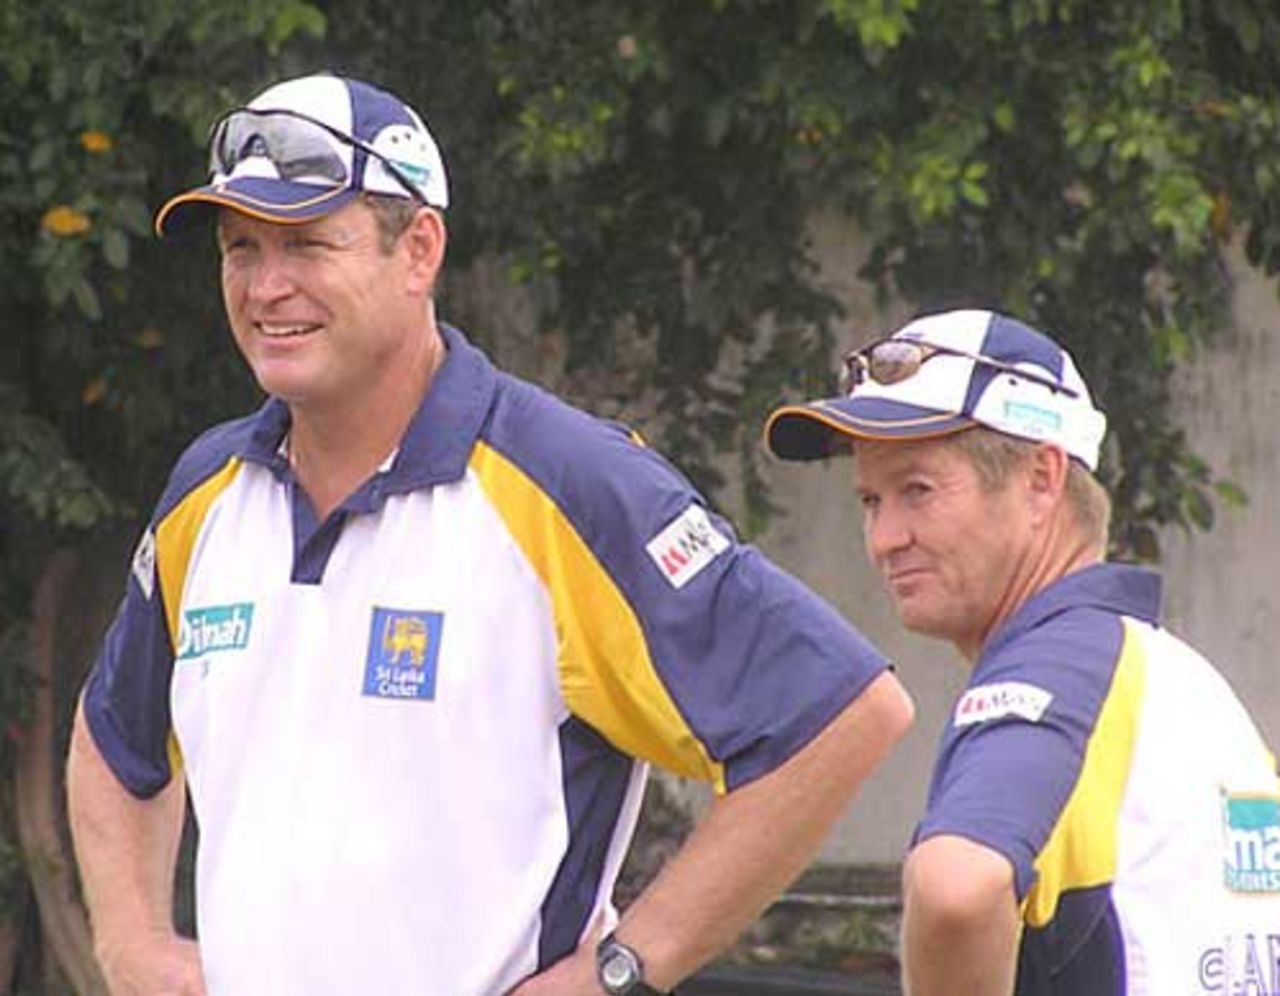 Tom Moody and Trevor Penney in discussion as Sri Lanka prepare to leave for the World Cup, Colombo, February 26, 2007